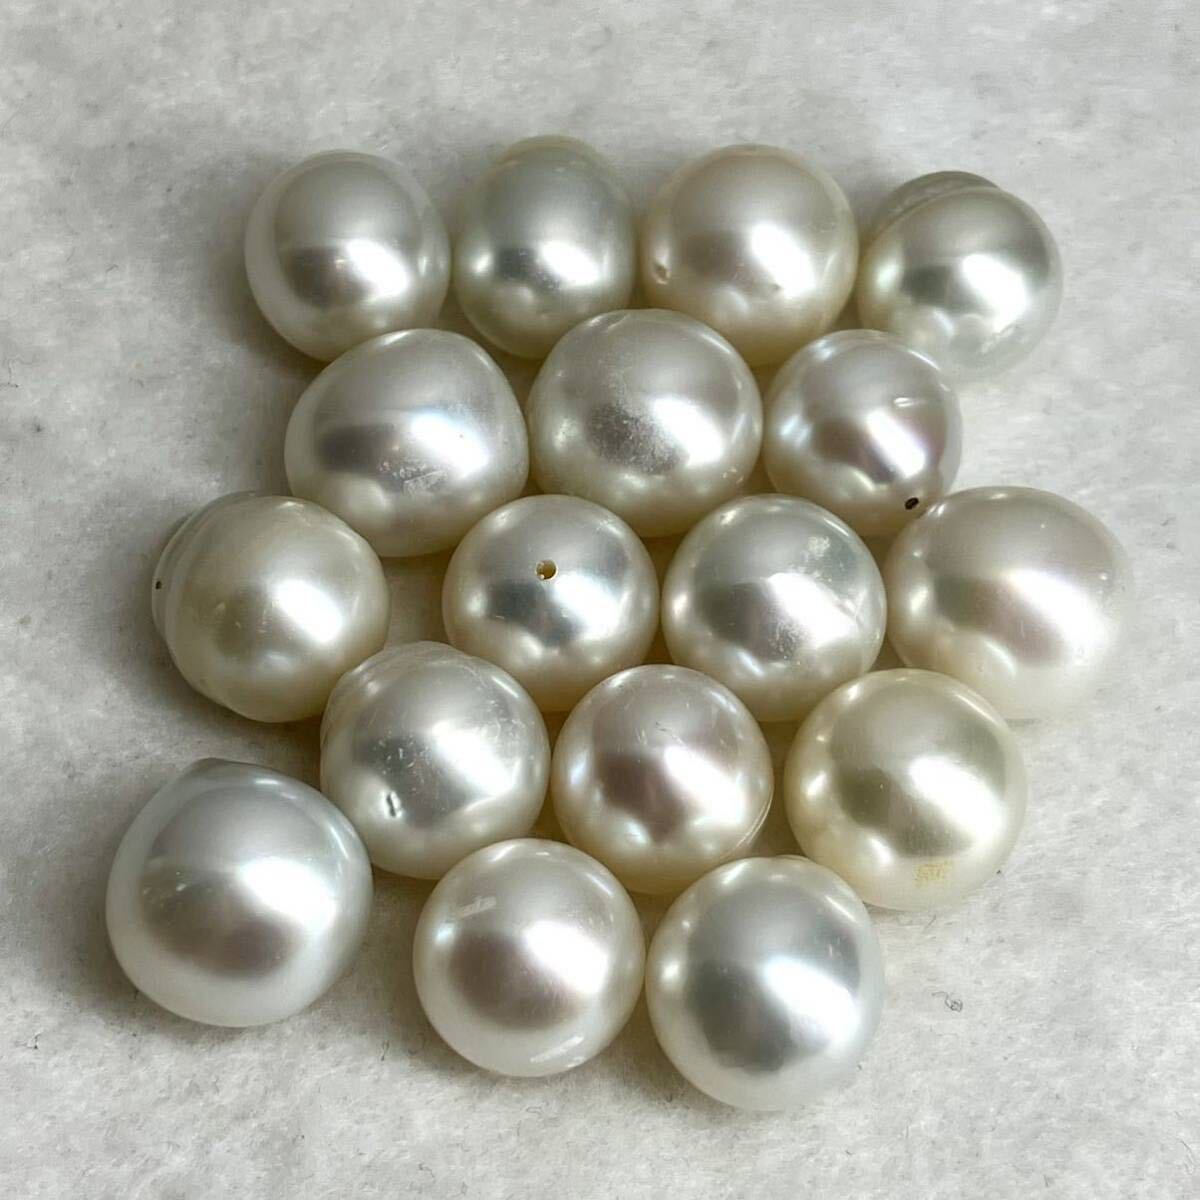 * south . White Butterfly pearl 17 point . summarize *m 50g/250ct approximately 11.3-13.3mm. loose unset jewel gem jewelry jewelry Pearl pearl K